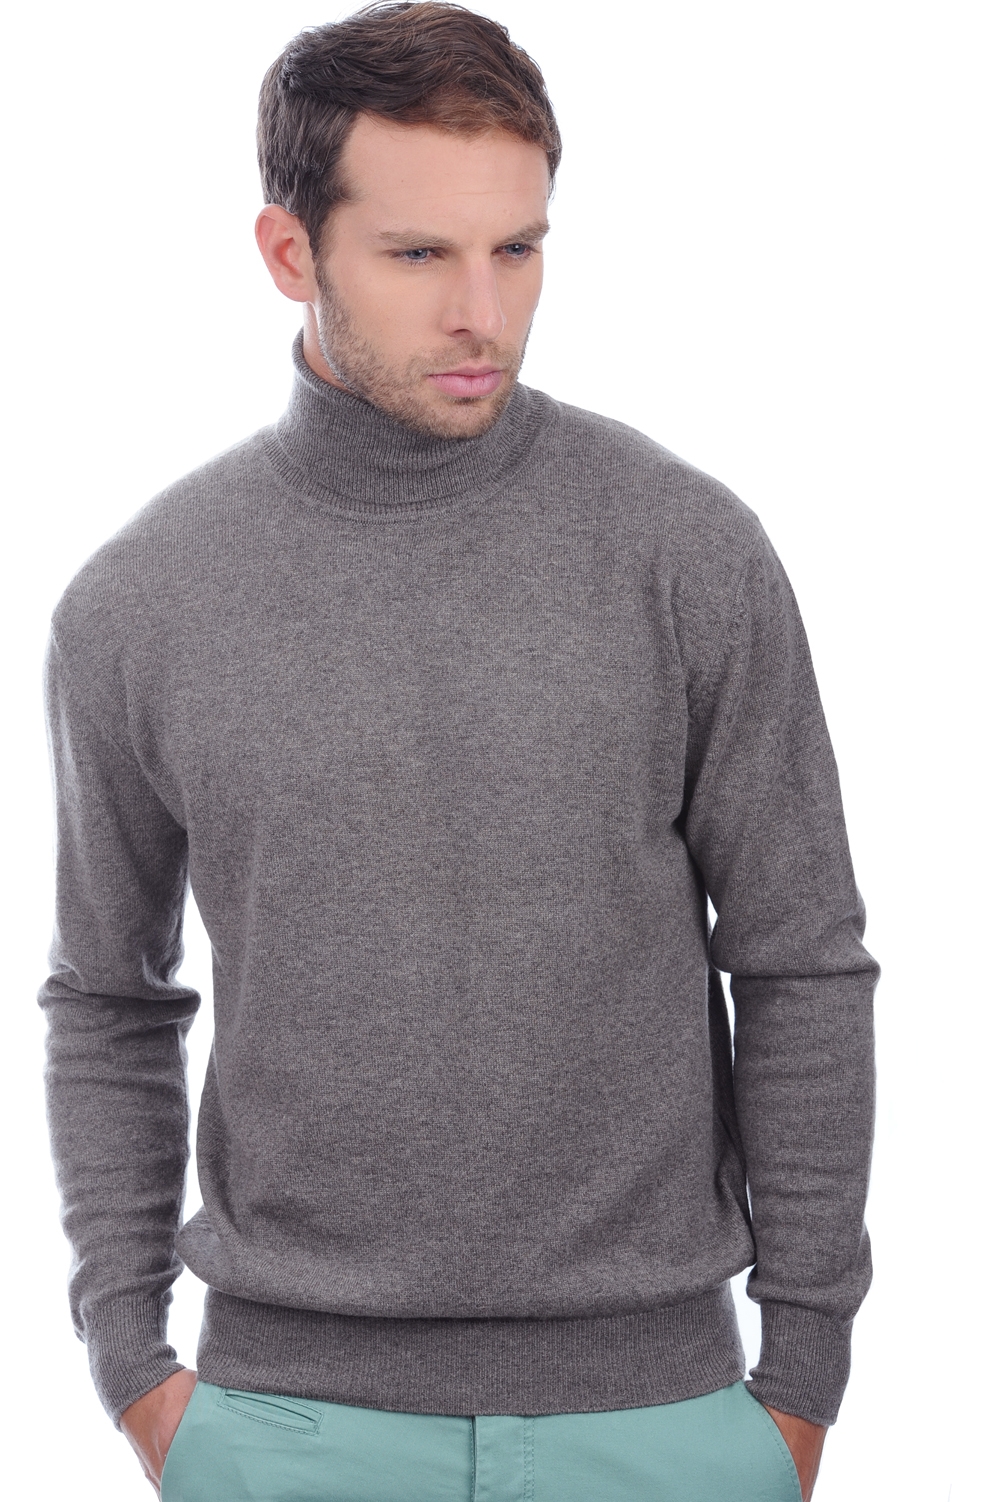 Cachemire pull homme col roule edgar marmotte chine 3xl